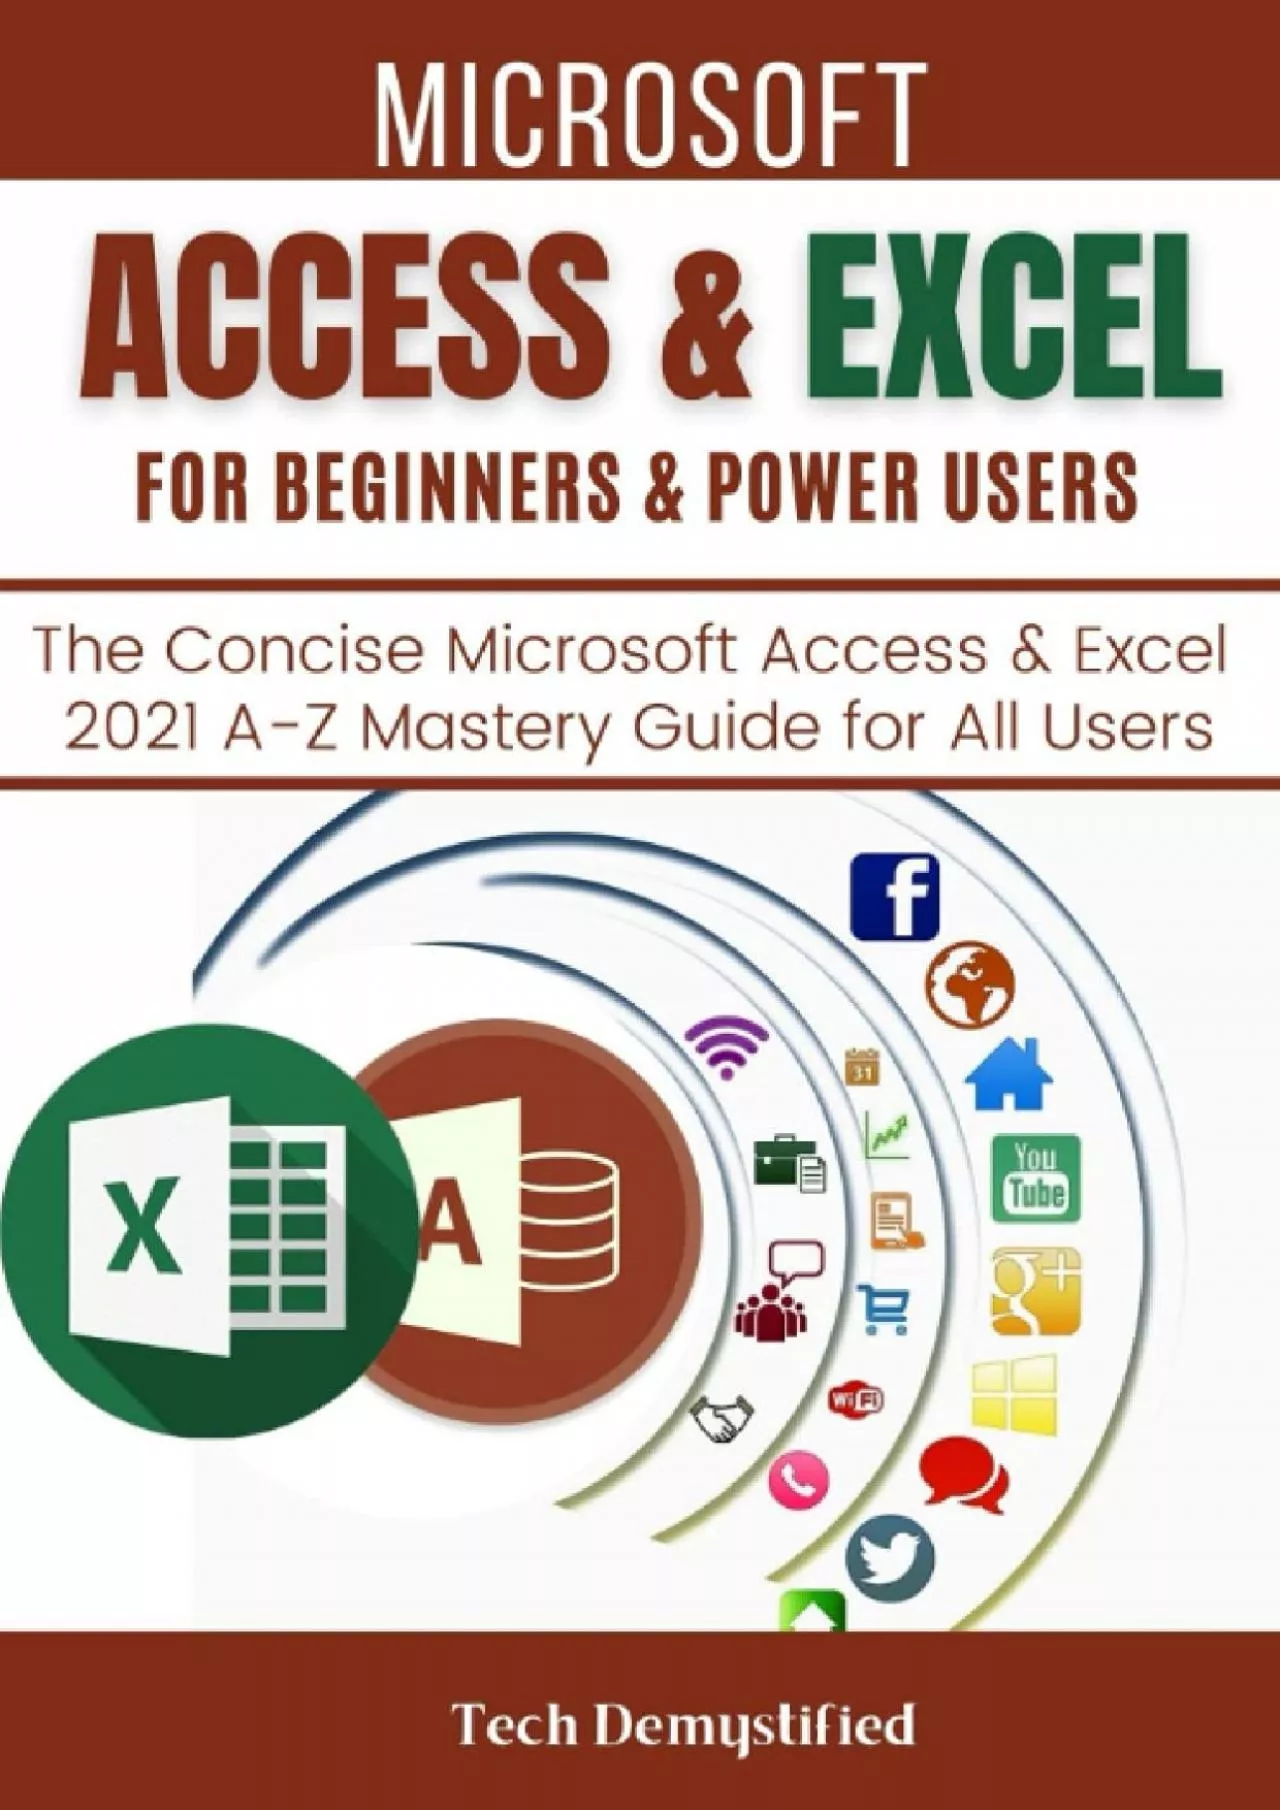 MICROSOFT ACCESS & EXCEL FOR BEGINNERS & POWER USERS: The Concise Microsoft Access & Excel